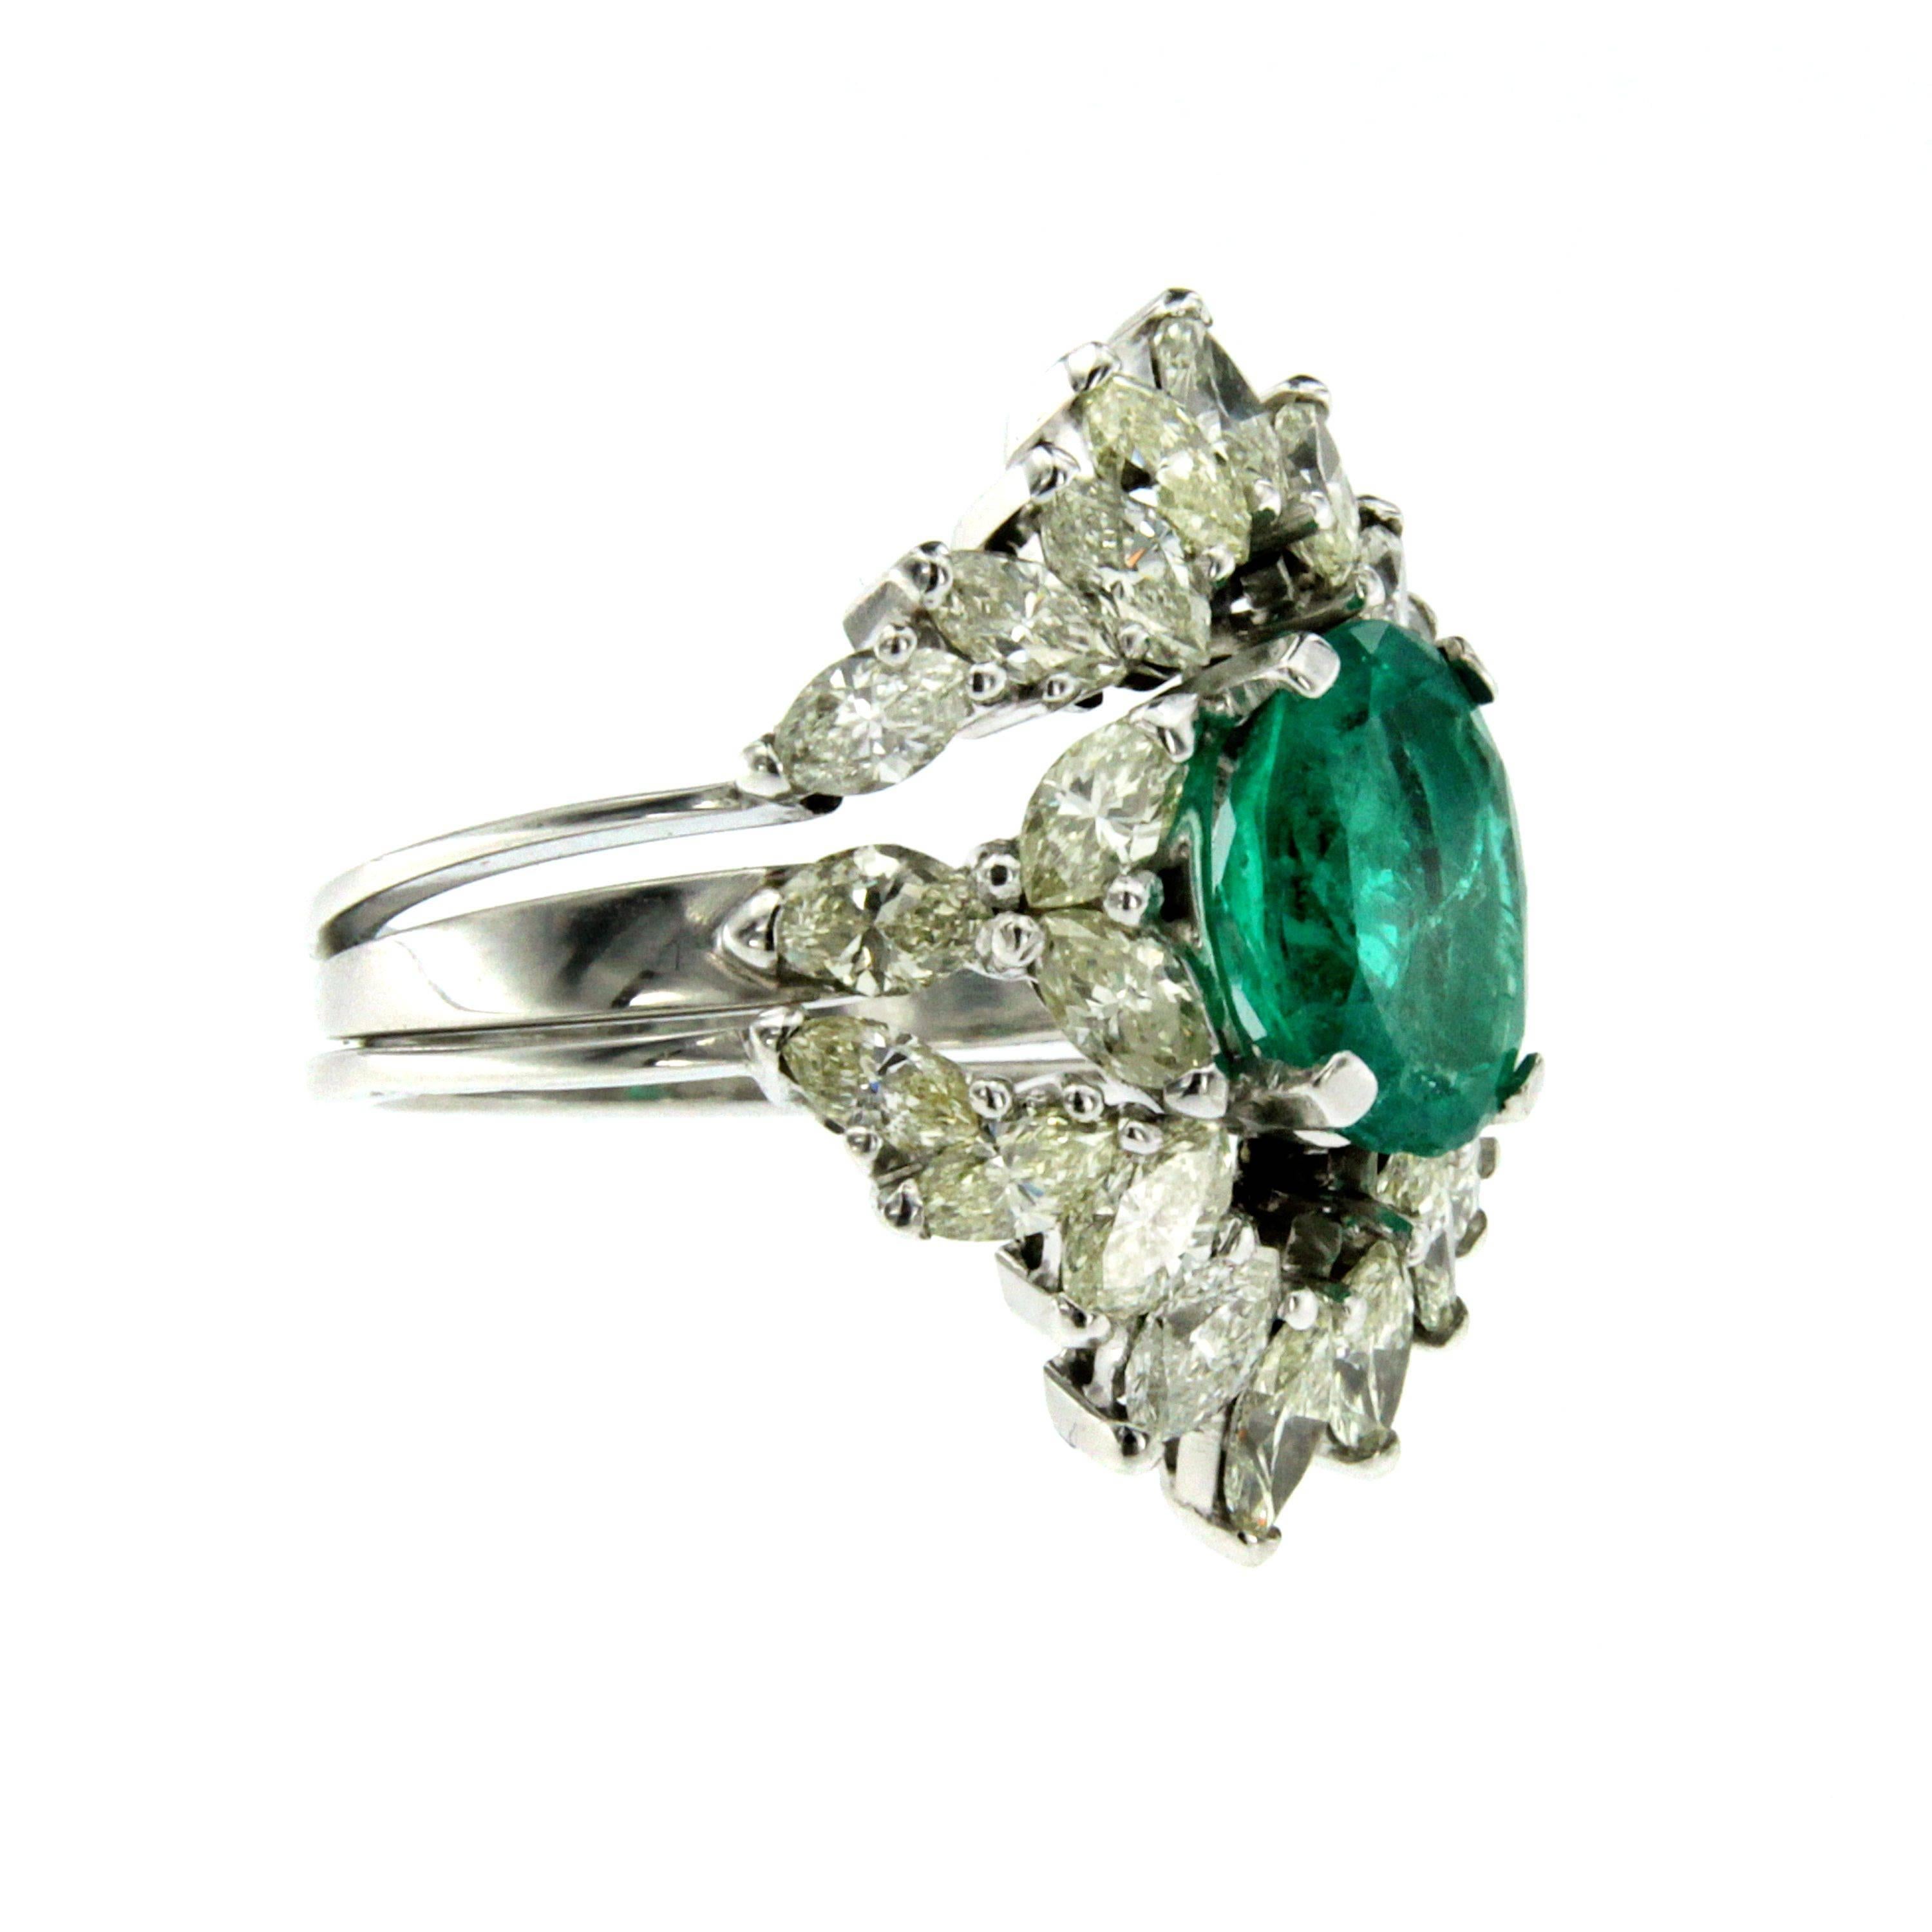 Stunning engagement ring centering an oval cut natural Colombian Emerald weighing 3.50 carat, flanked by 2.50 carats of navette cut diamonds J color VS. Mounted in 18K white gold.

CONDITION: Pre-owned - Excellent
METAL: 18k White Gold
GEM STONE: